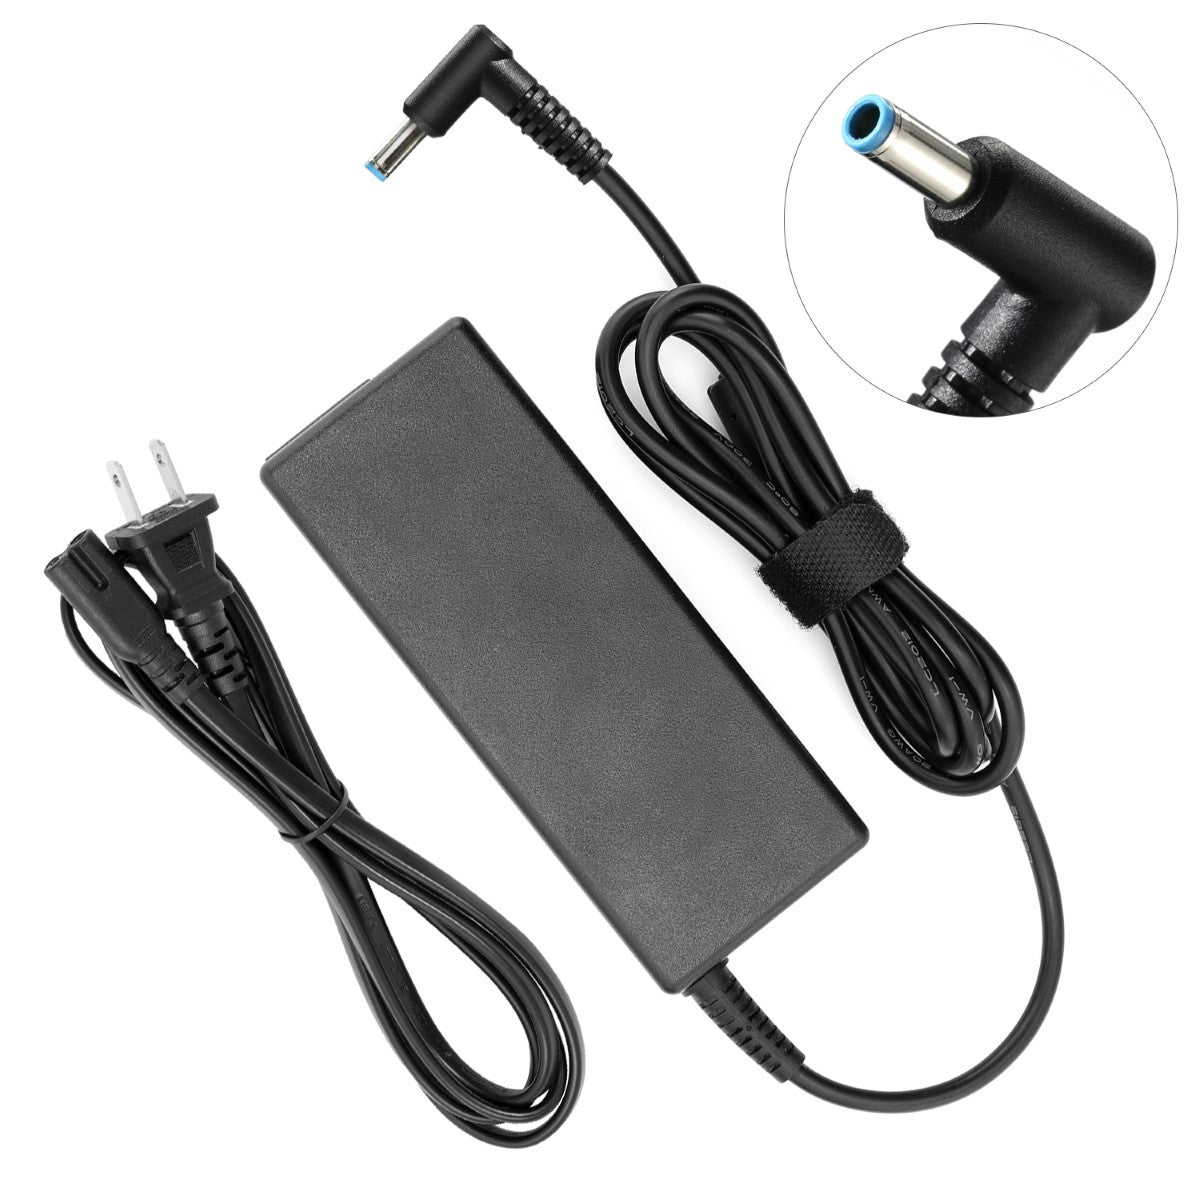 AC Adapter Charger for HP Spectre 13-4002dx Notebook.